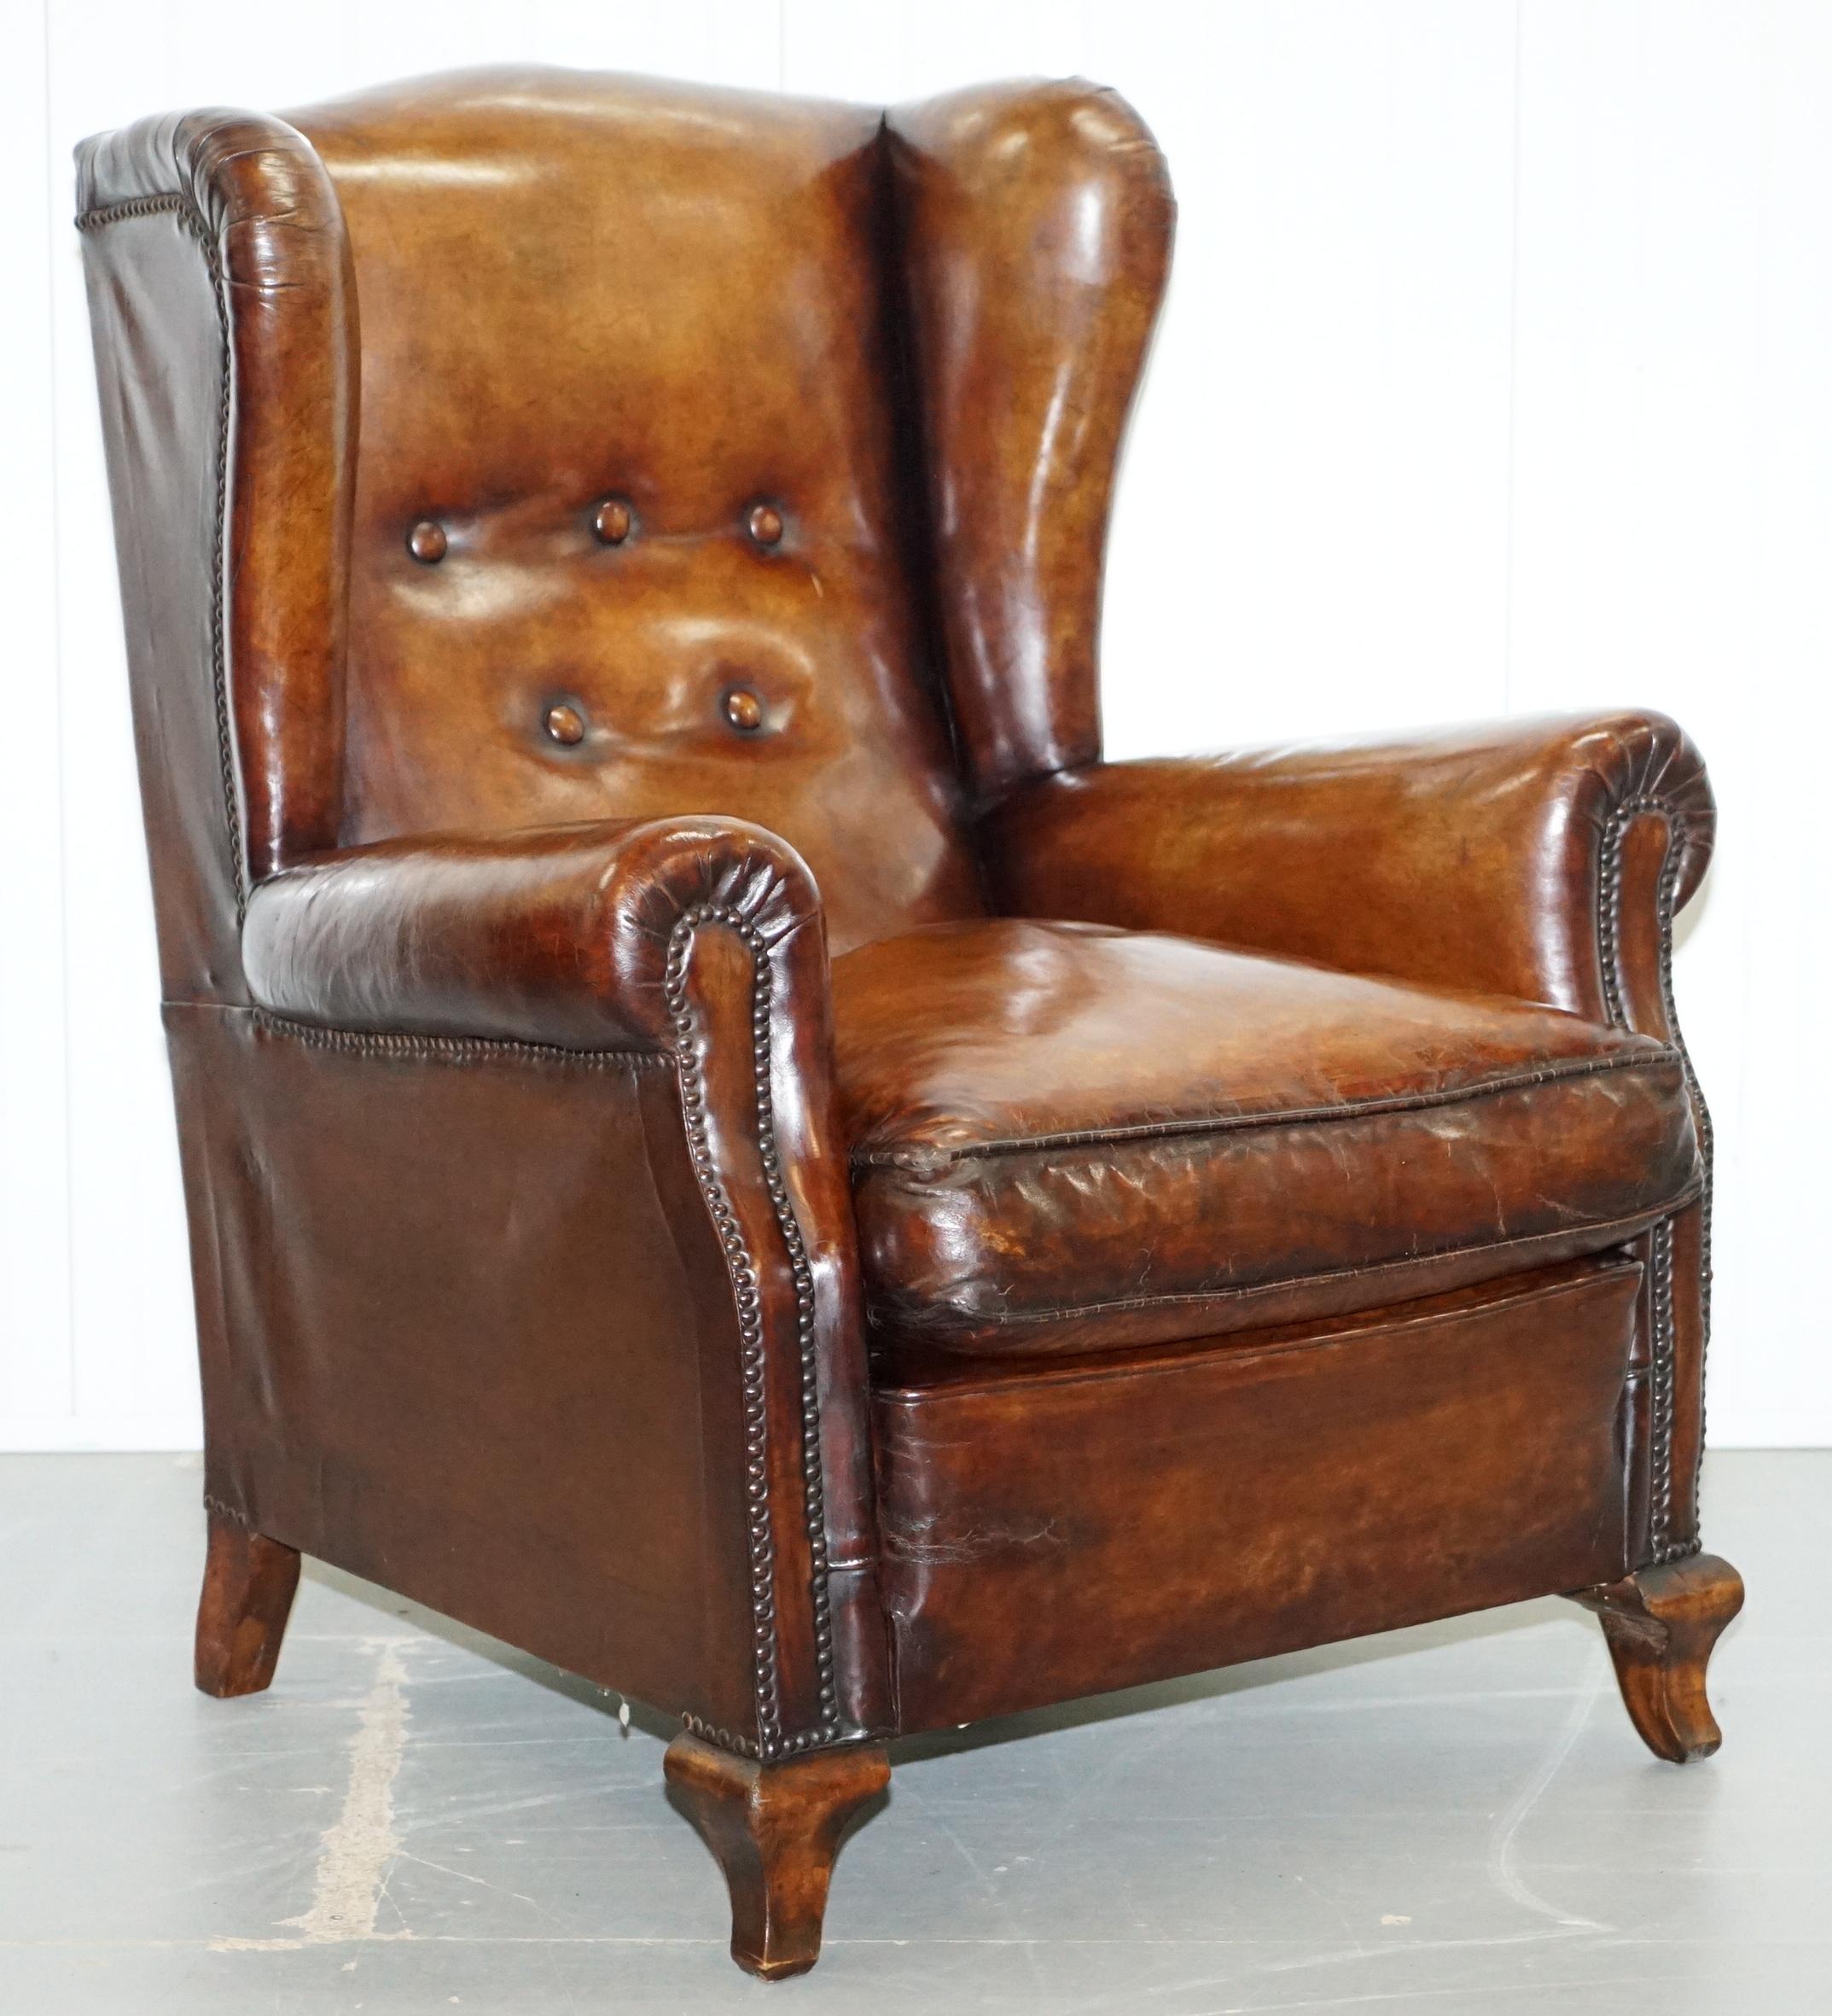 We are delighted to offer this stunning pair of fully restored Victorian wingback club armchairs hand dyed this lovely whiskey brown color.

A good looking and well-made pair, the seat cushions are feather filled and fully leather upholstered on